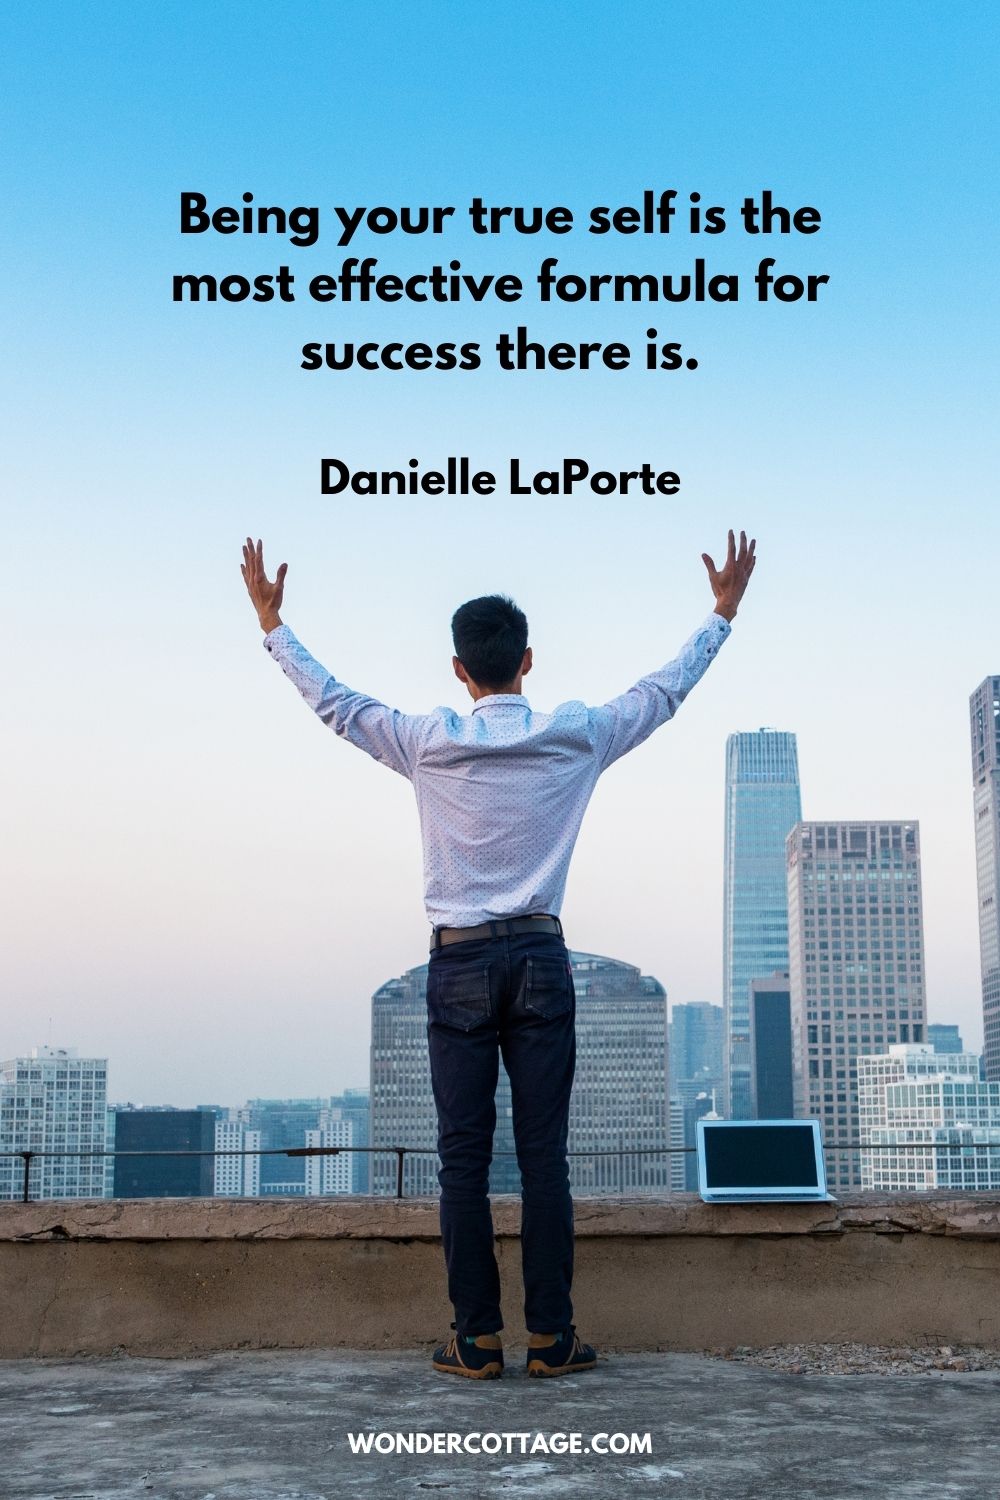 Being your true self is the most effective formula for success there is. Danielle LaPorte